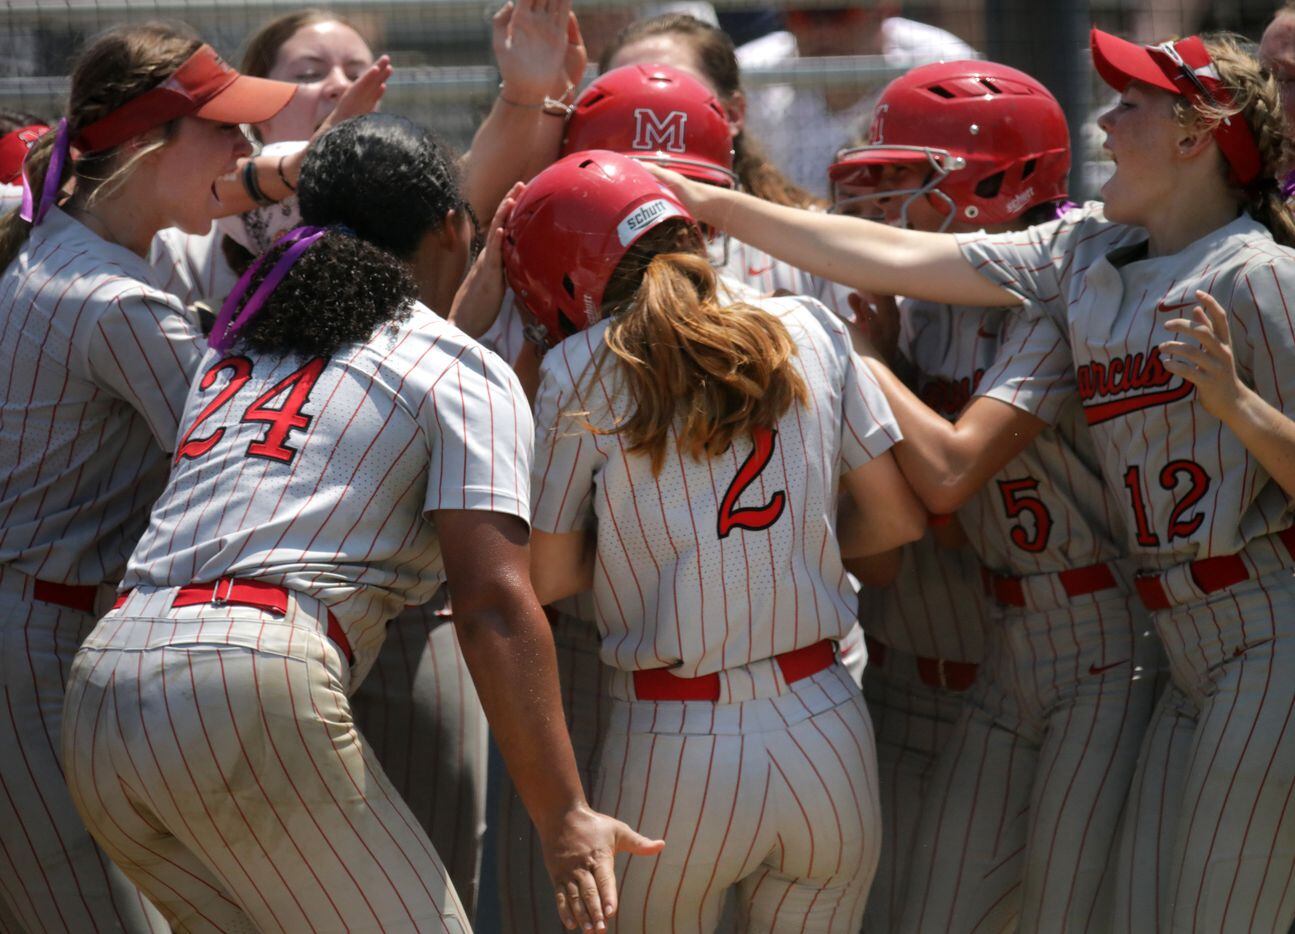 The team celebrates at home plate as Flower Mound Marcus High School player #2, Makayla...